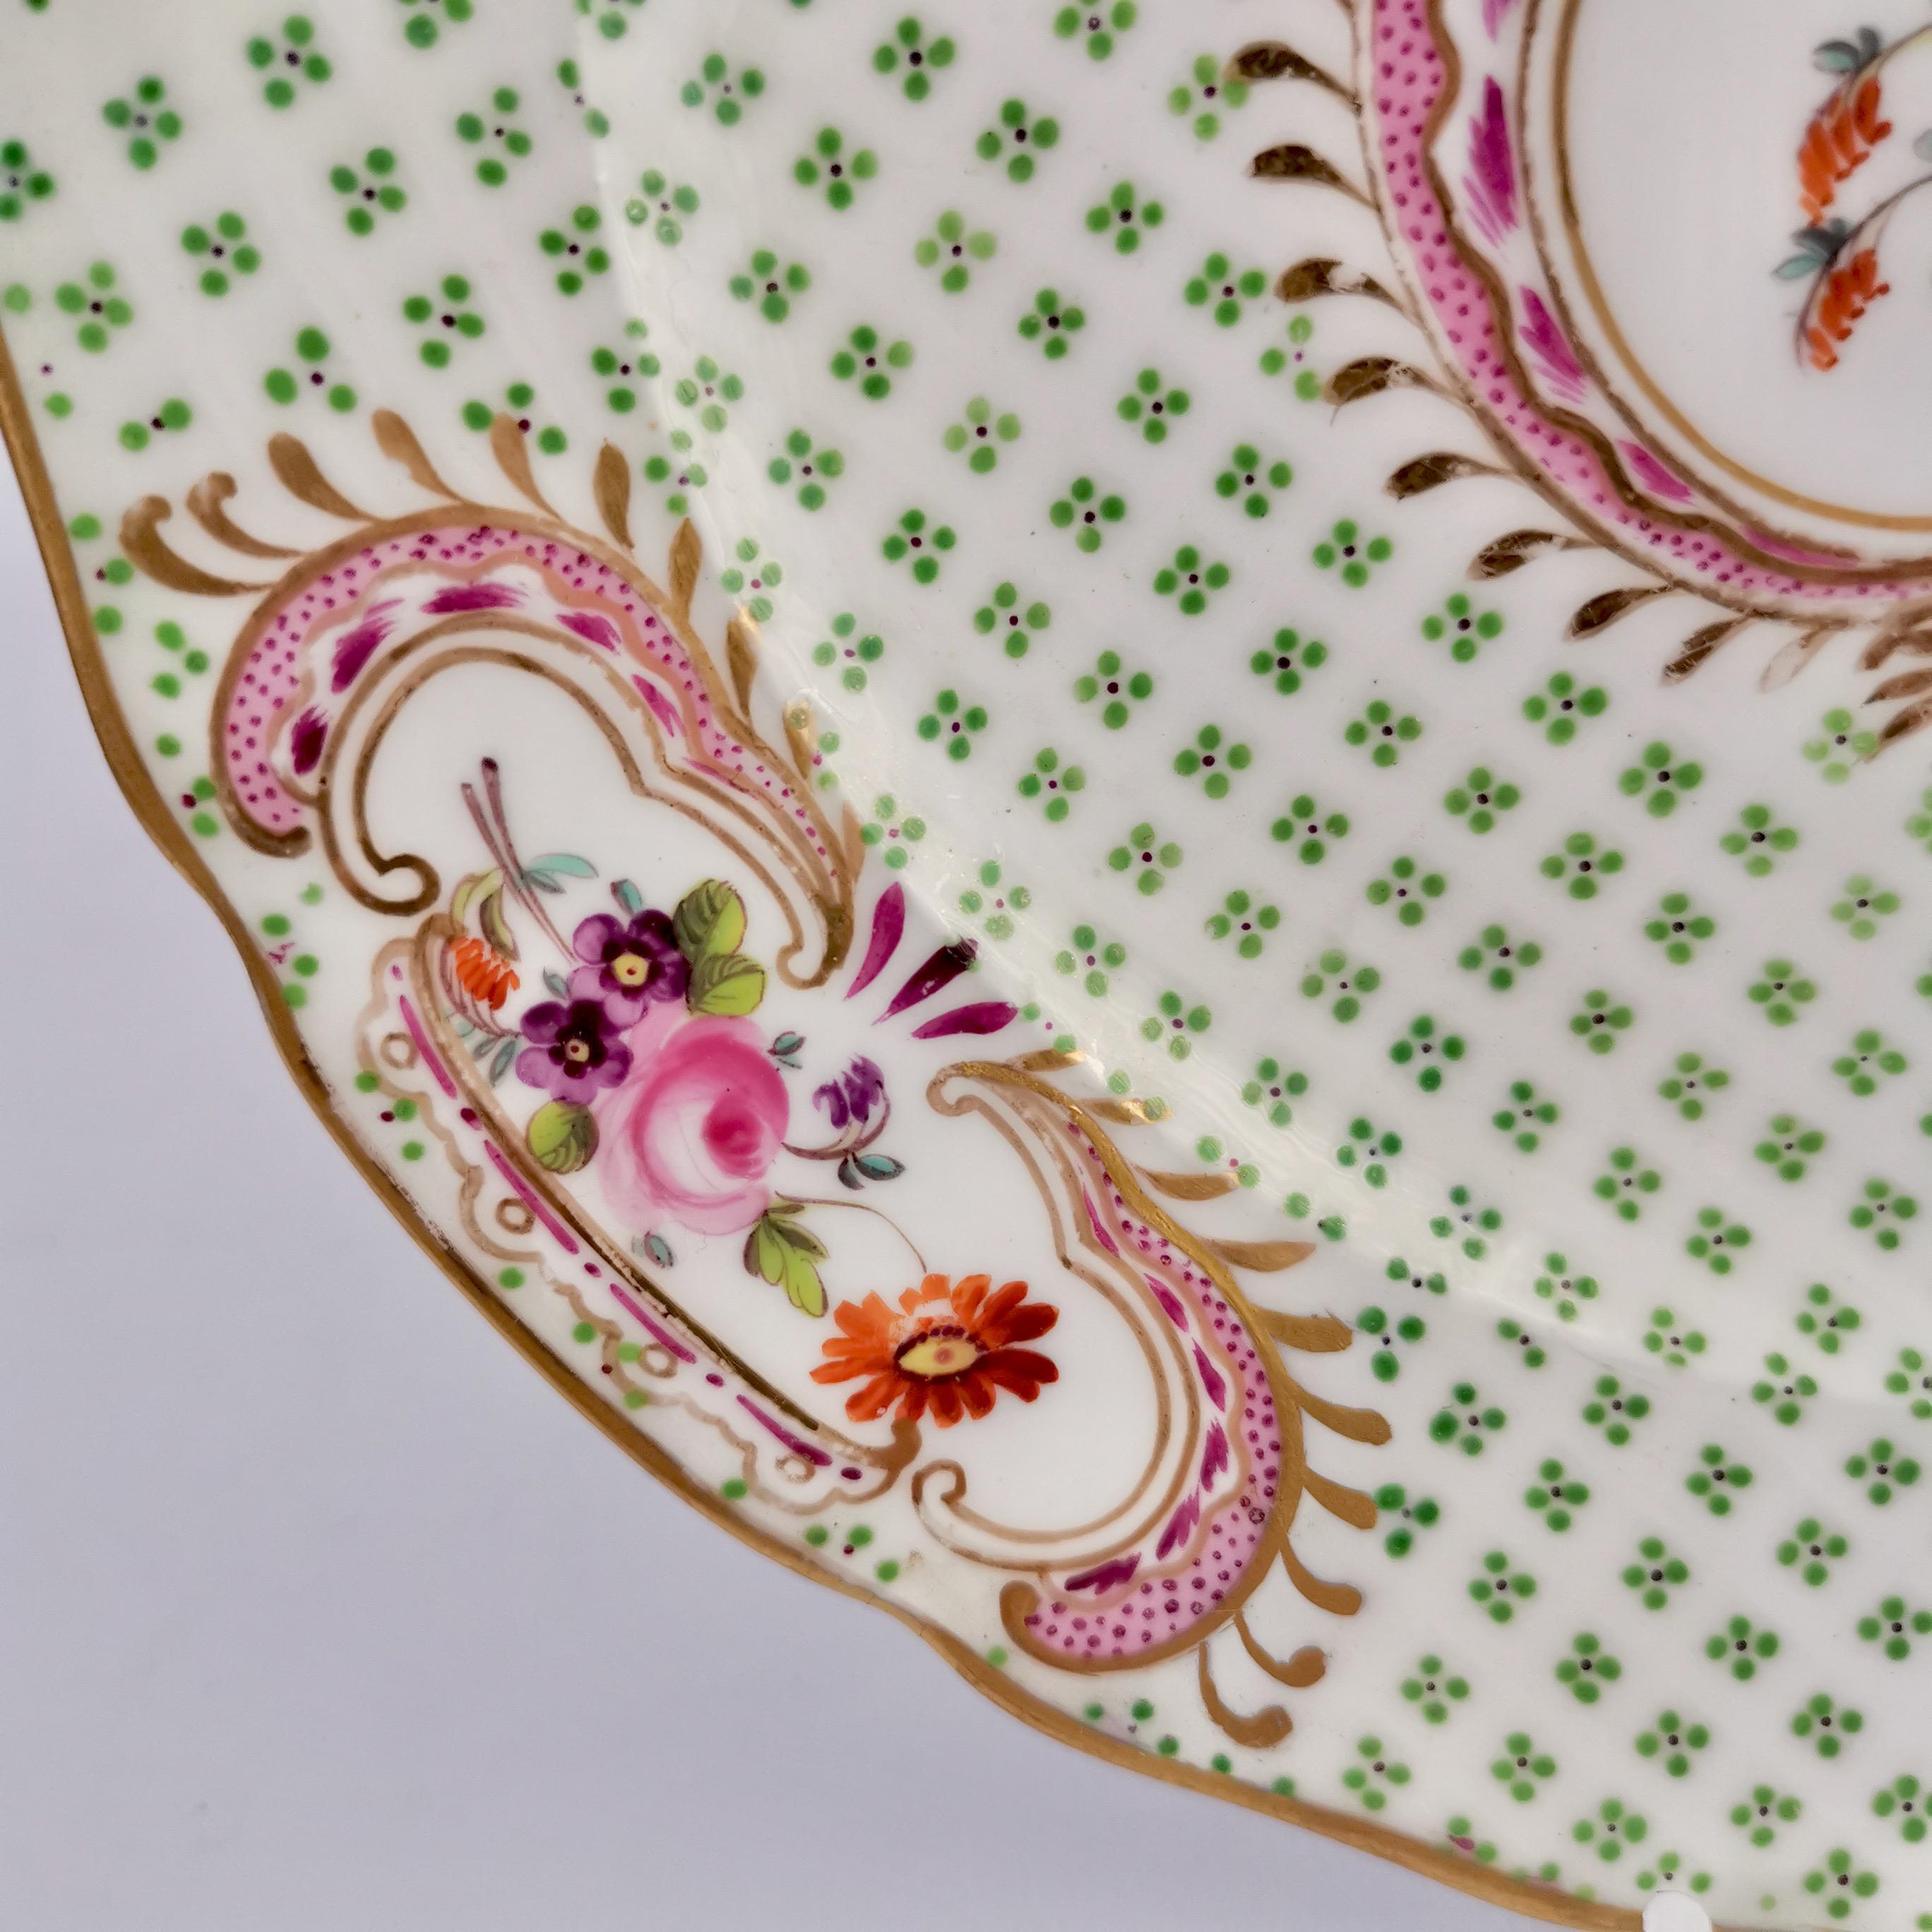 Early 19th Century Coalport Small Porcelain Plate, Green and Gilt, Flowers, Regency, circa 1820